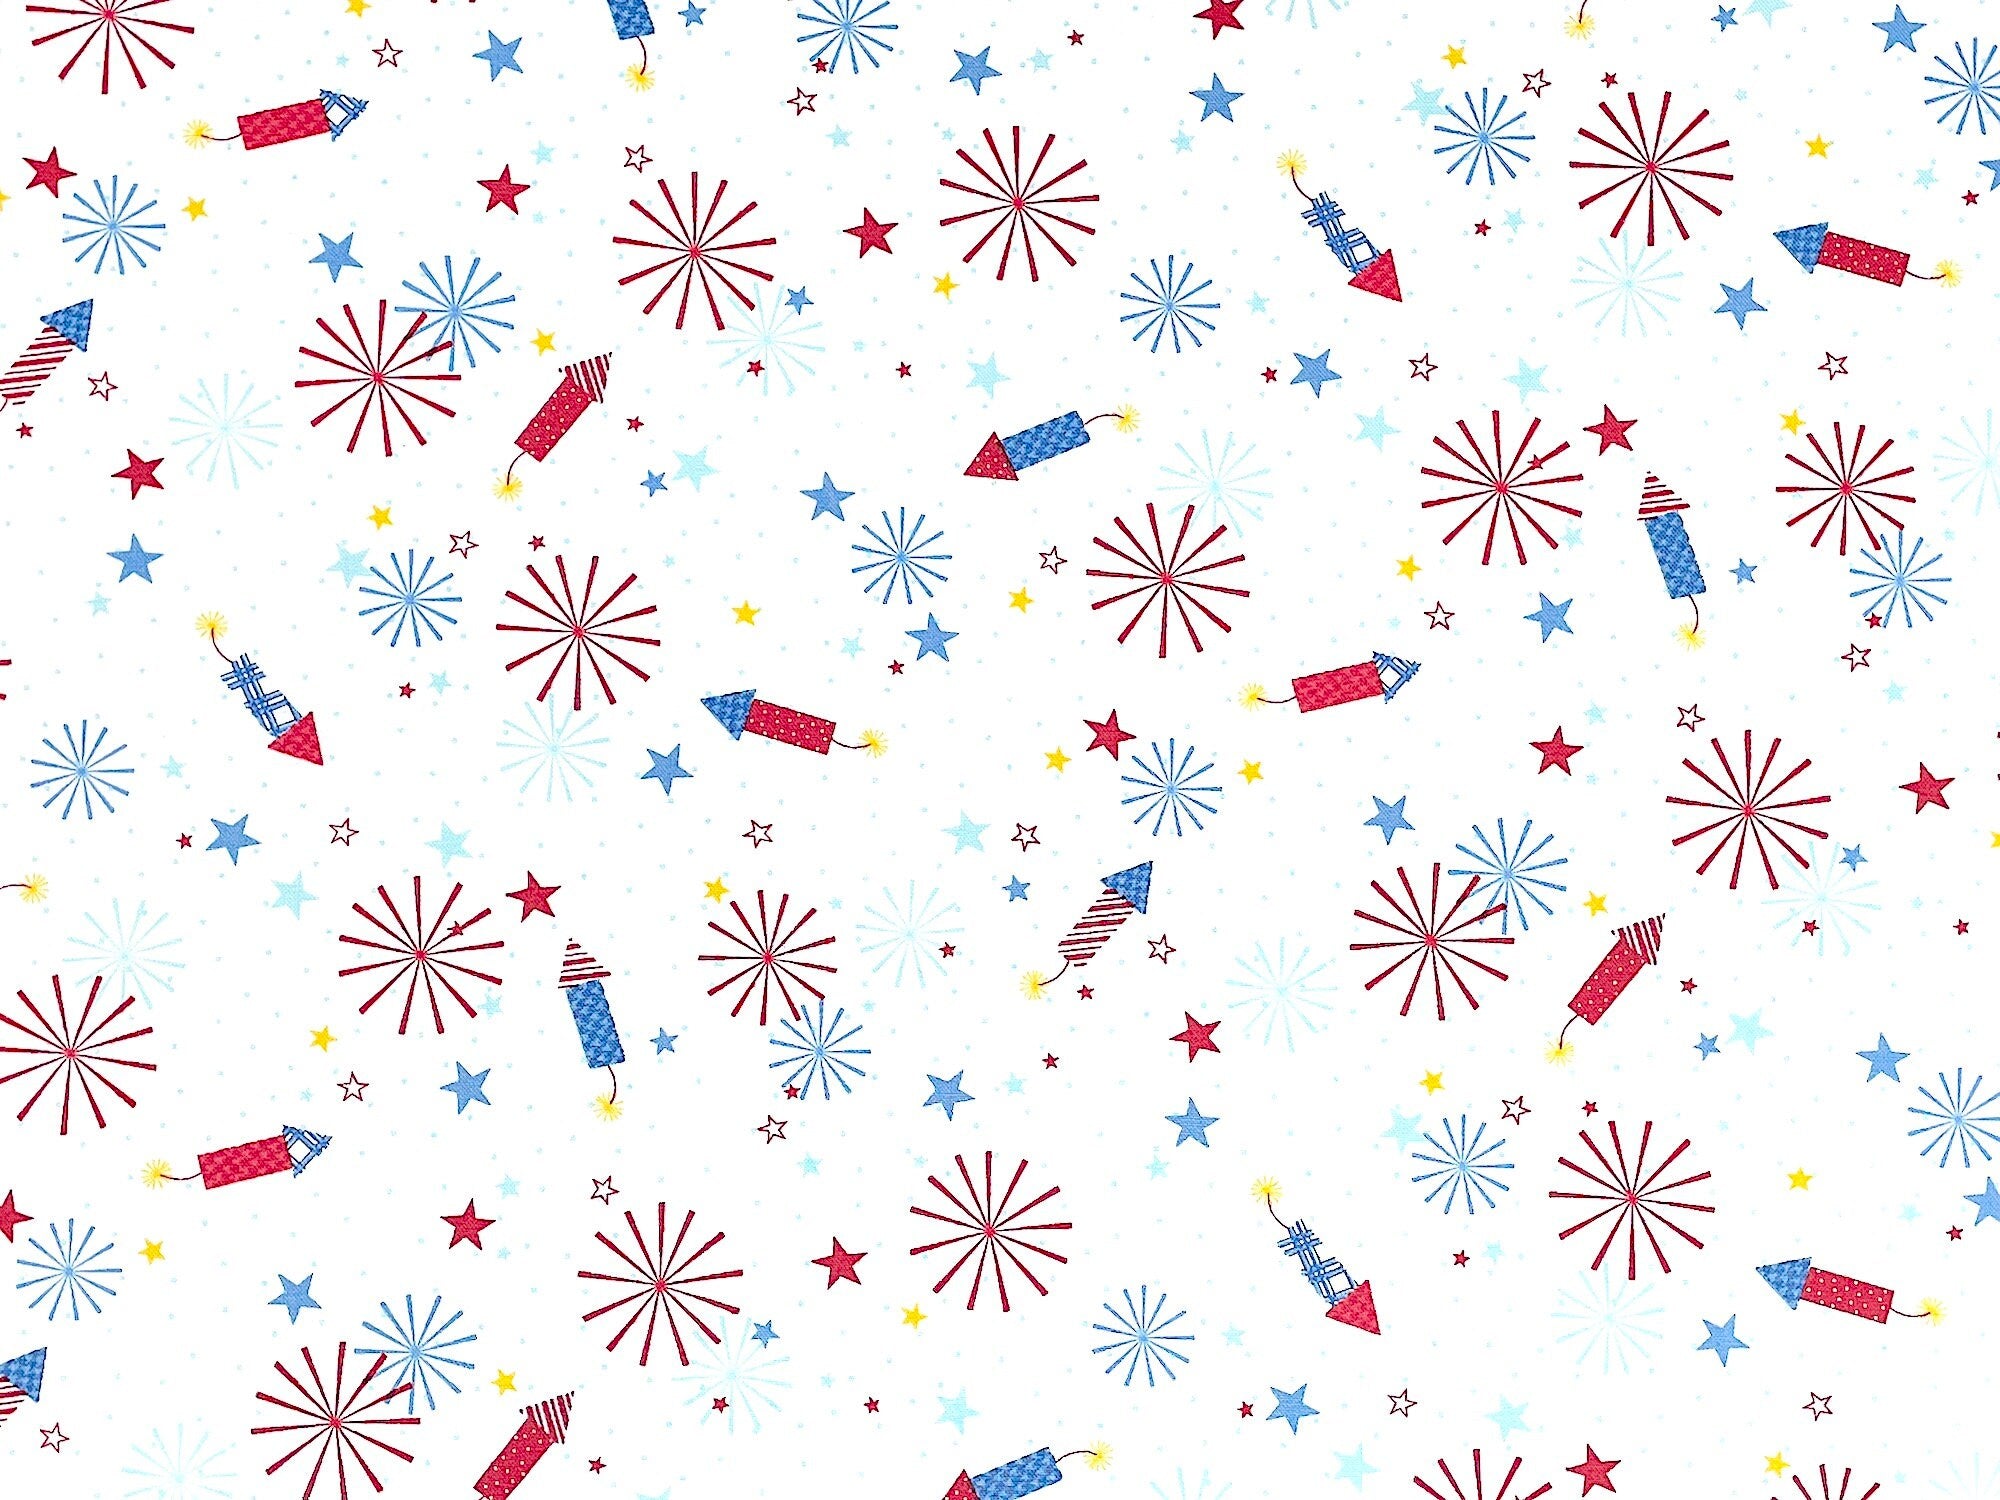 Here is a colorful Patriotic Fabric with Red White and Blue Fireworks on a White background. You will also find yellow, red and blue stars and small blue dots on this white fabric.